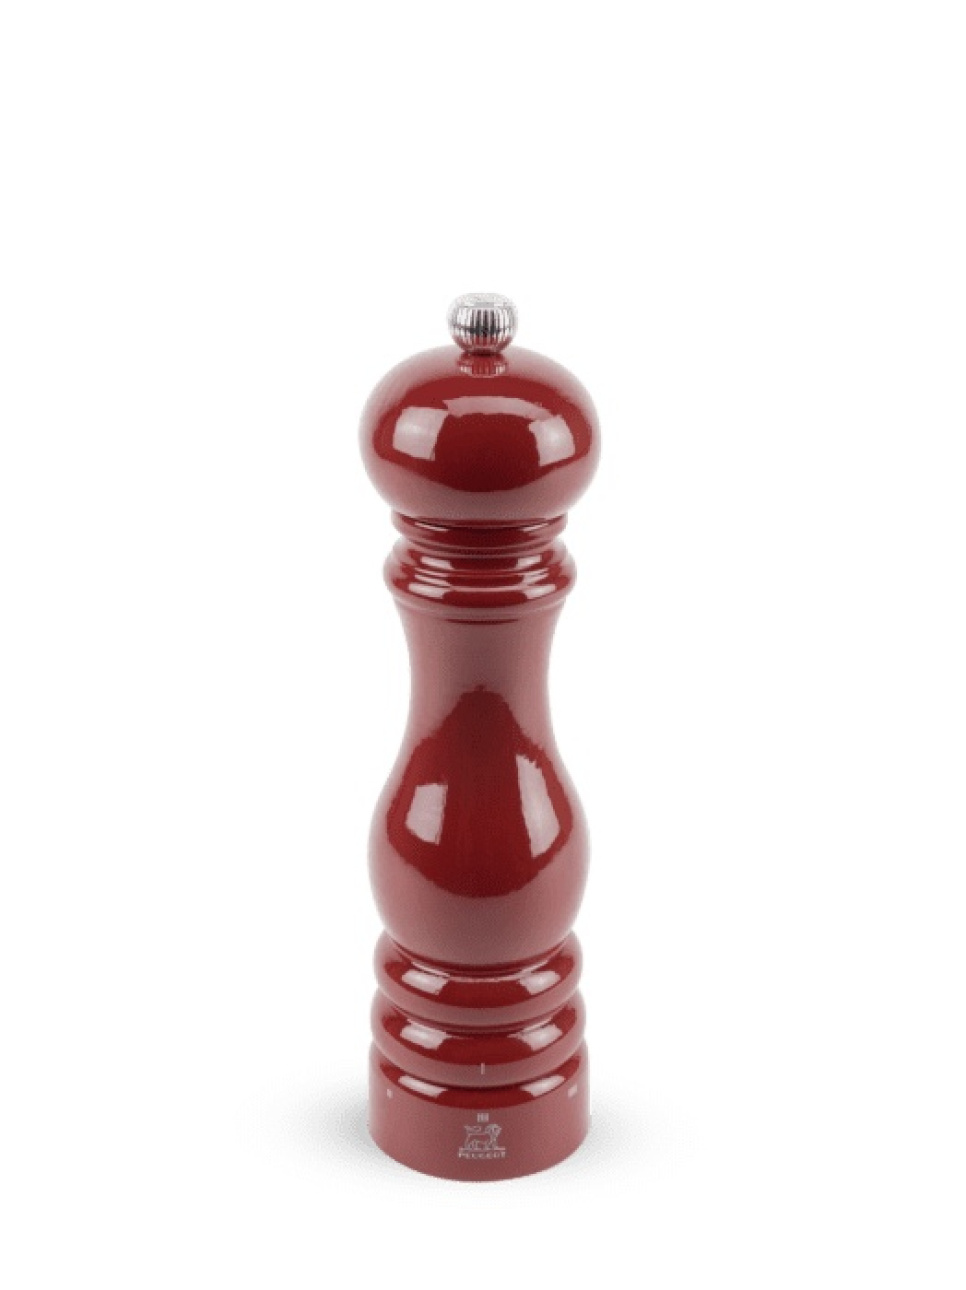 Paris Pepper mill 22 cm, U Select, Red - Peugeot in the group Cooking / Kitchen utensils / Salt & pepper mills at KitchenLab (1090-13456)